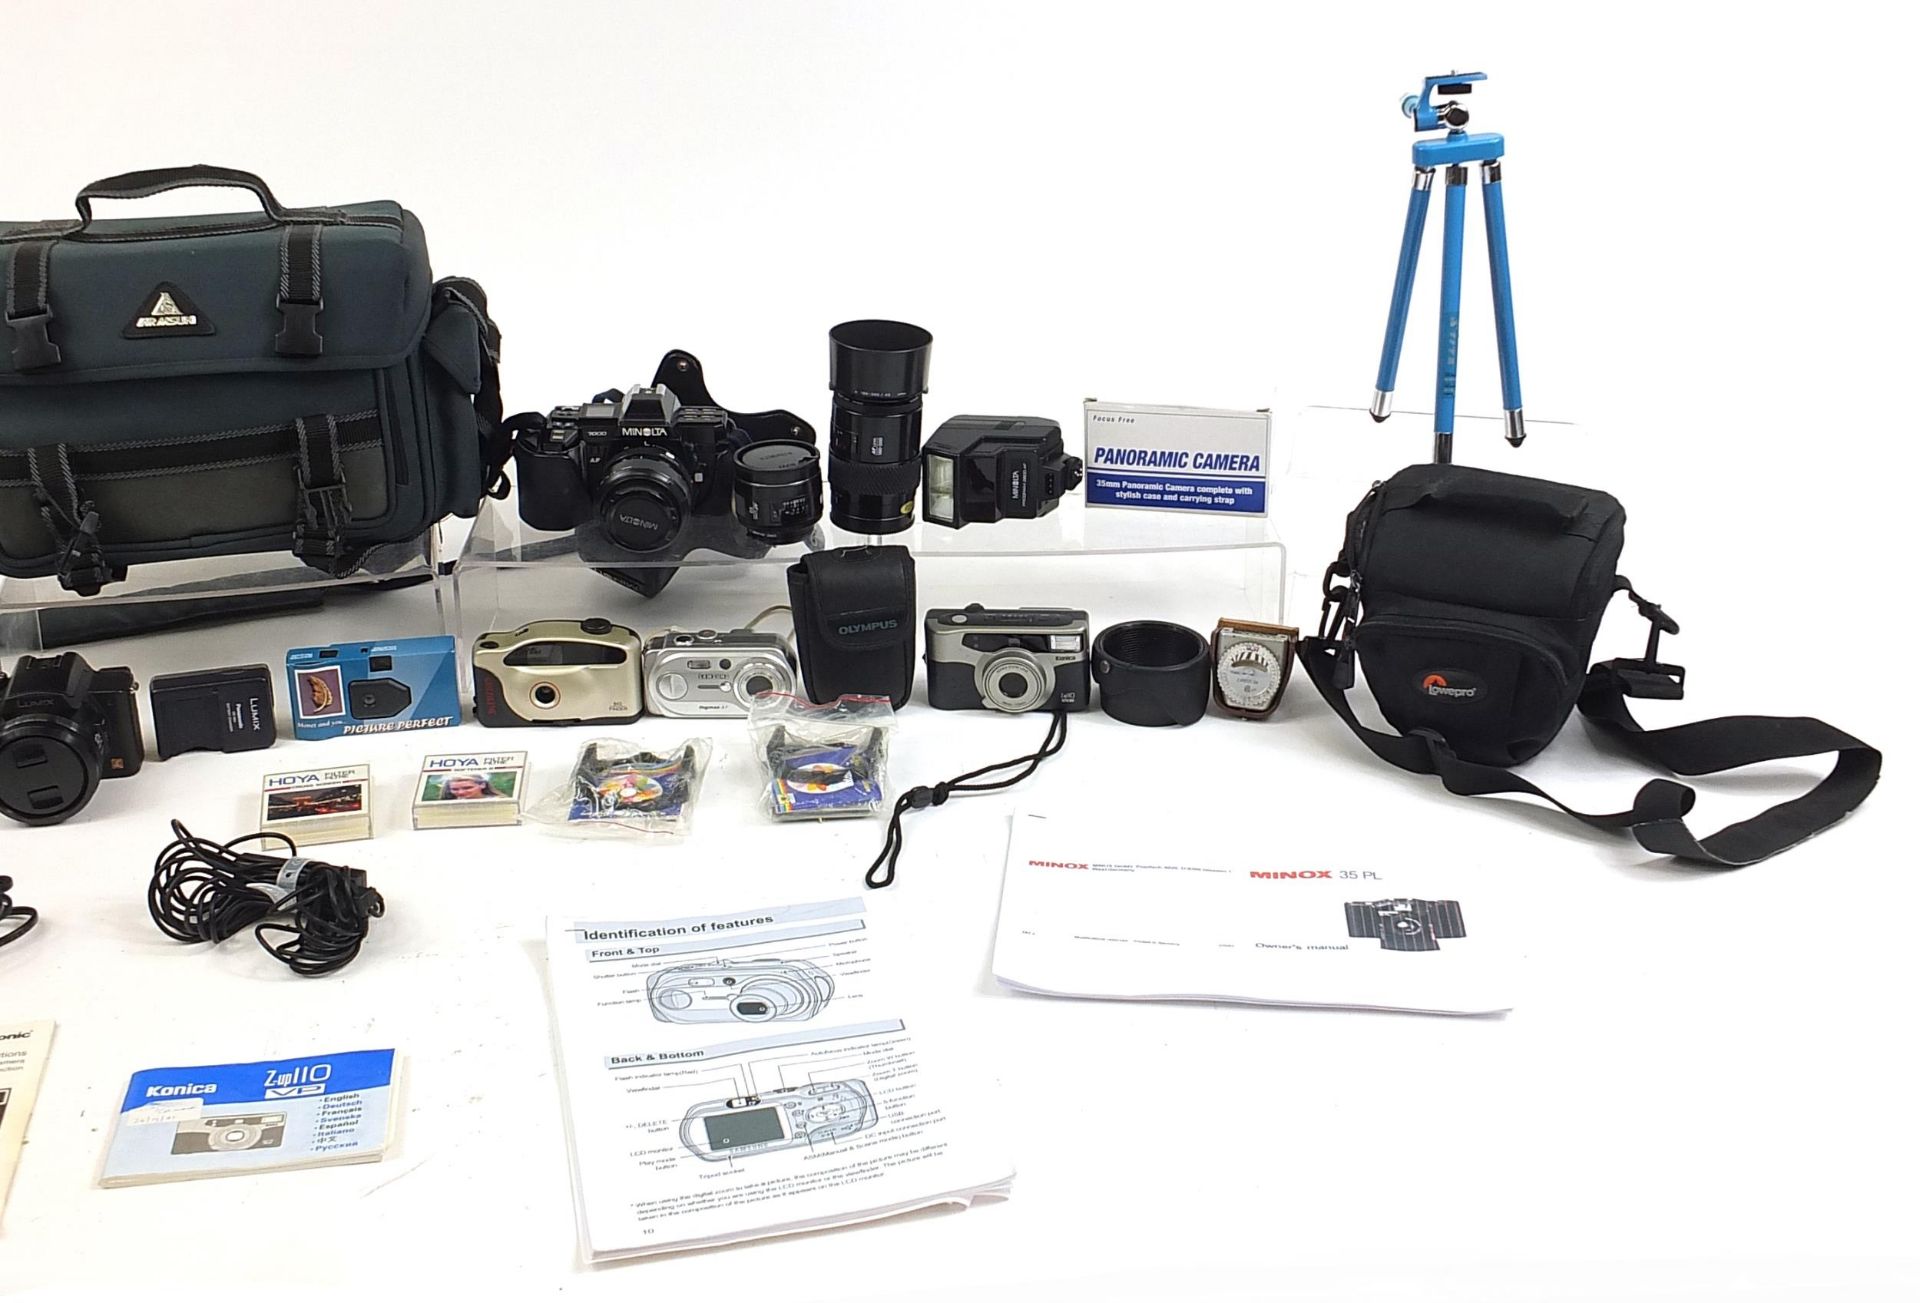 Vintage and later cameras, lenses and accessories including Minolta 7000 and Panasonic Lumix DMC- - Image 3 of 3